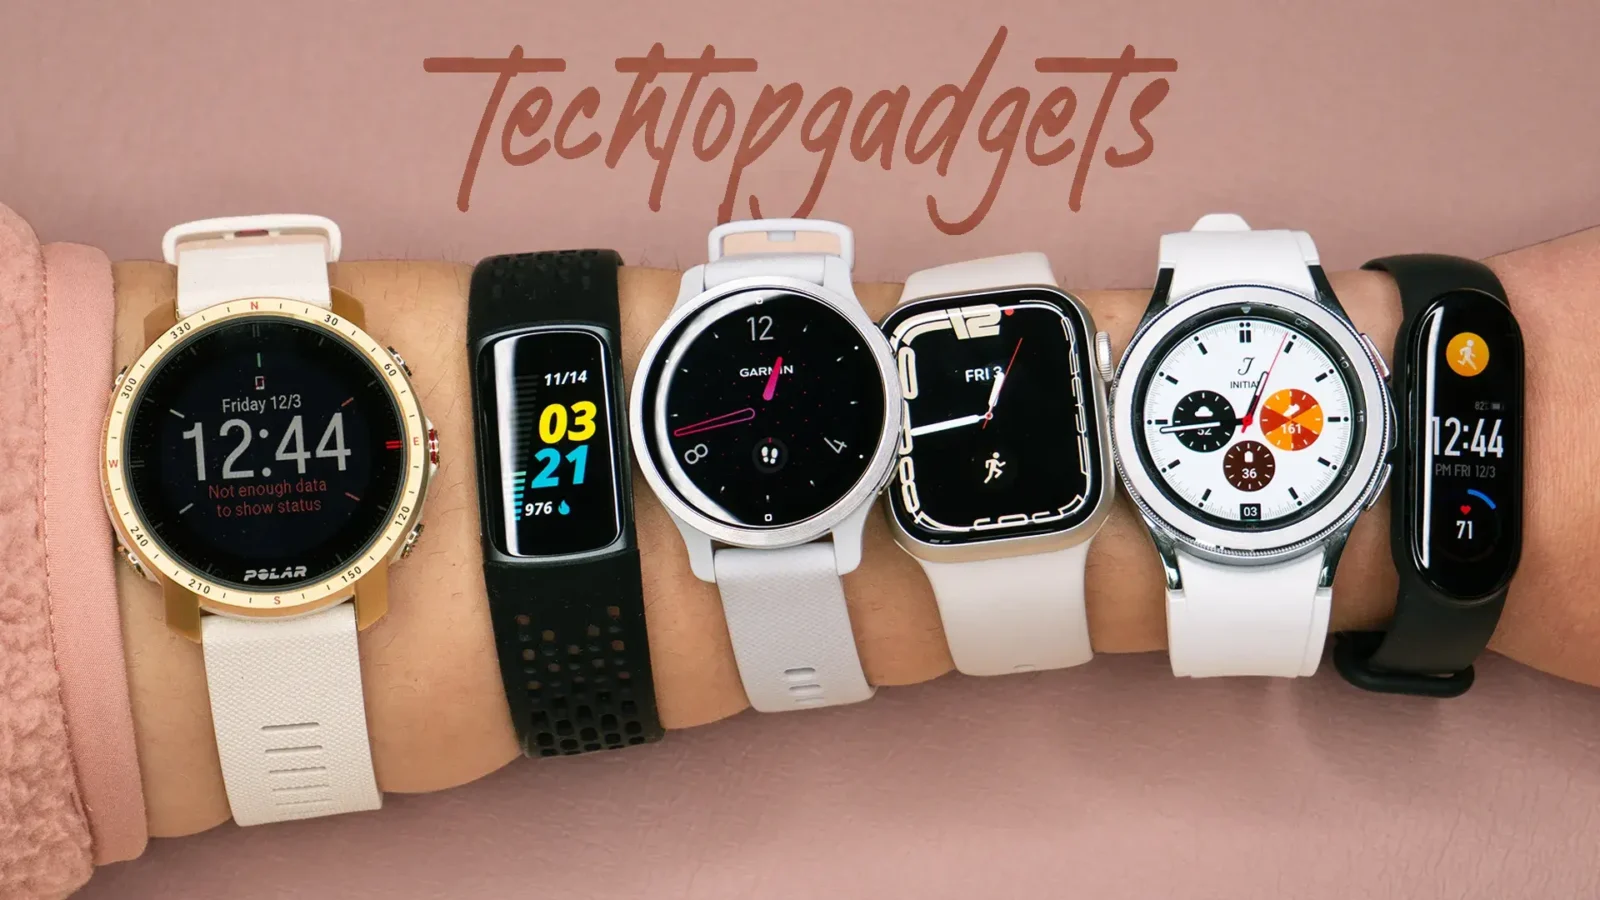 A collection of the finest smartwatches, including the Yowow Bit Smart Watch, each providing the best ECG and blood pressure monitoring for everyday health management.